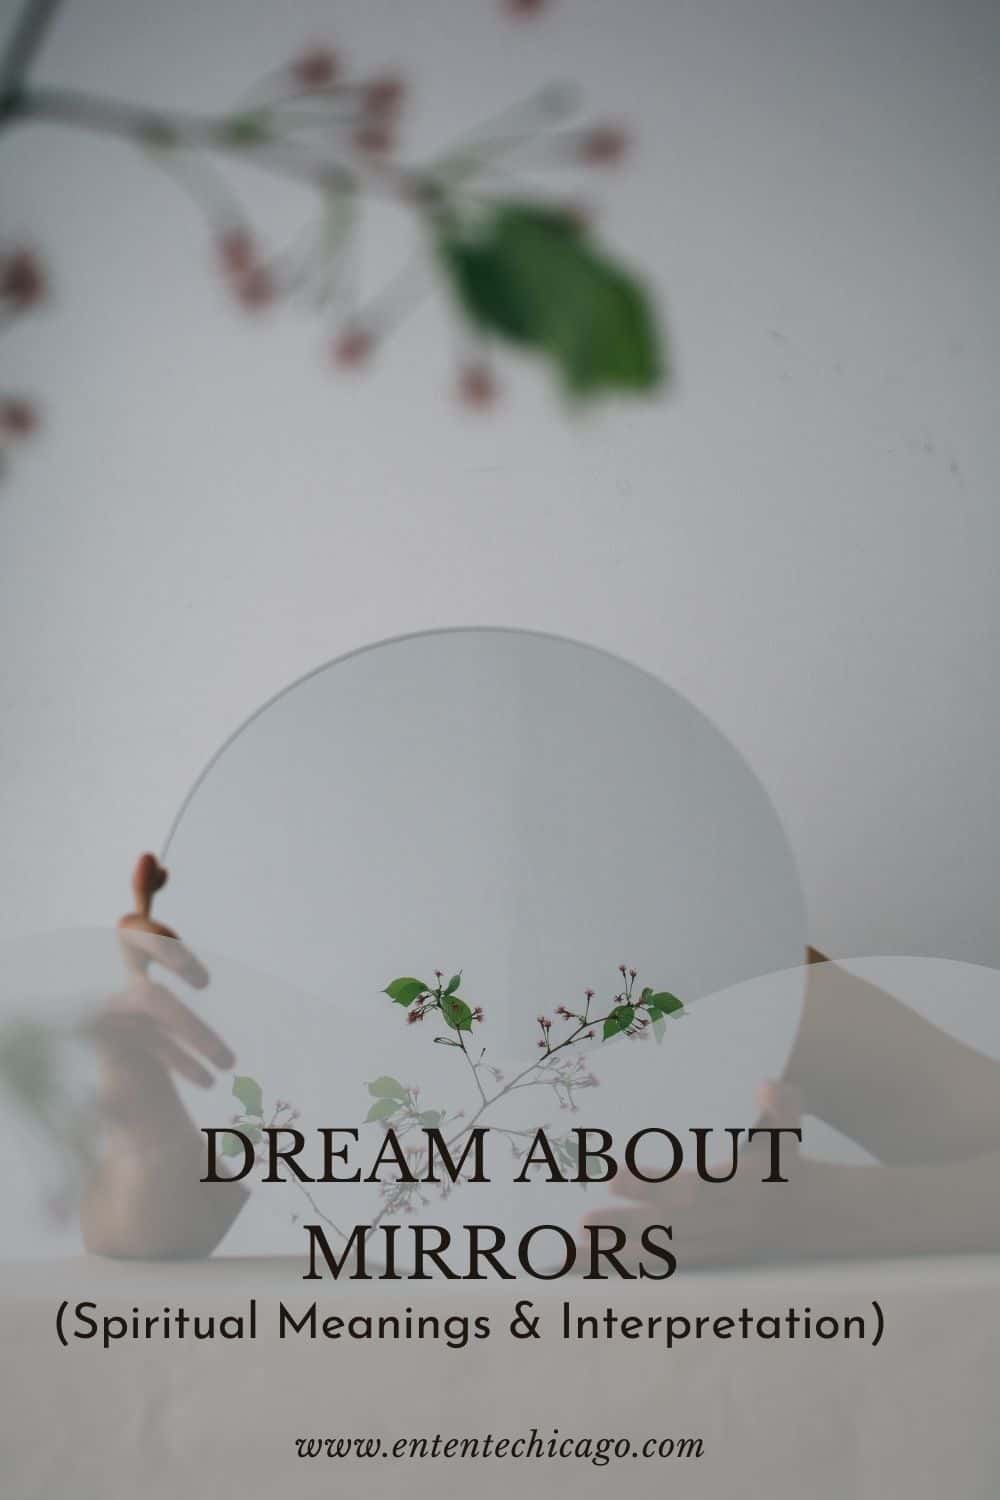 How Do The Different Mirrors In Dreams Affect The Meaning?